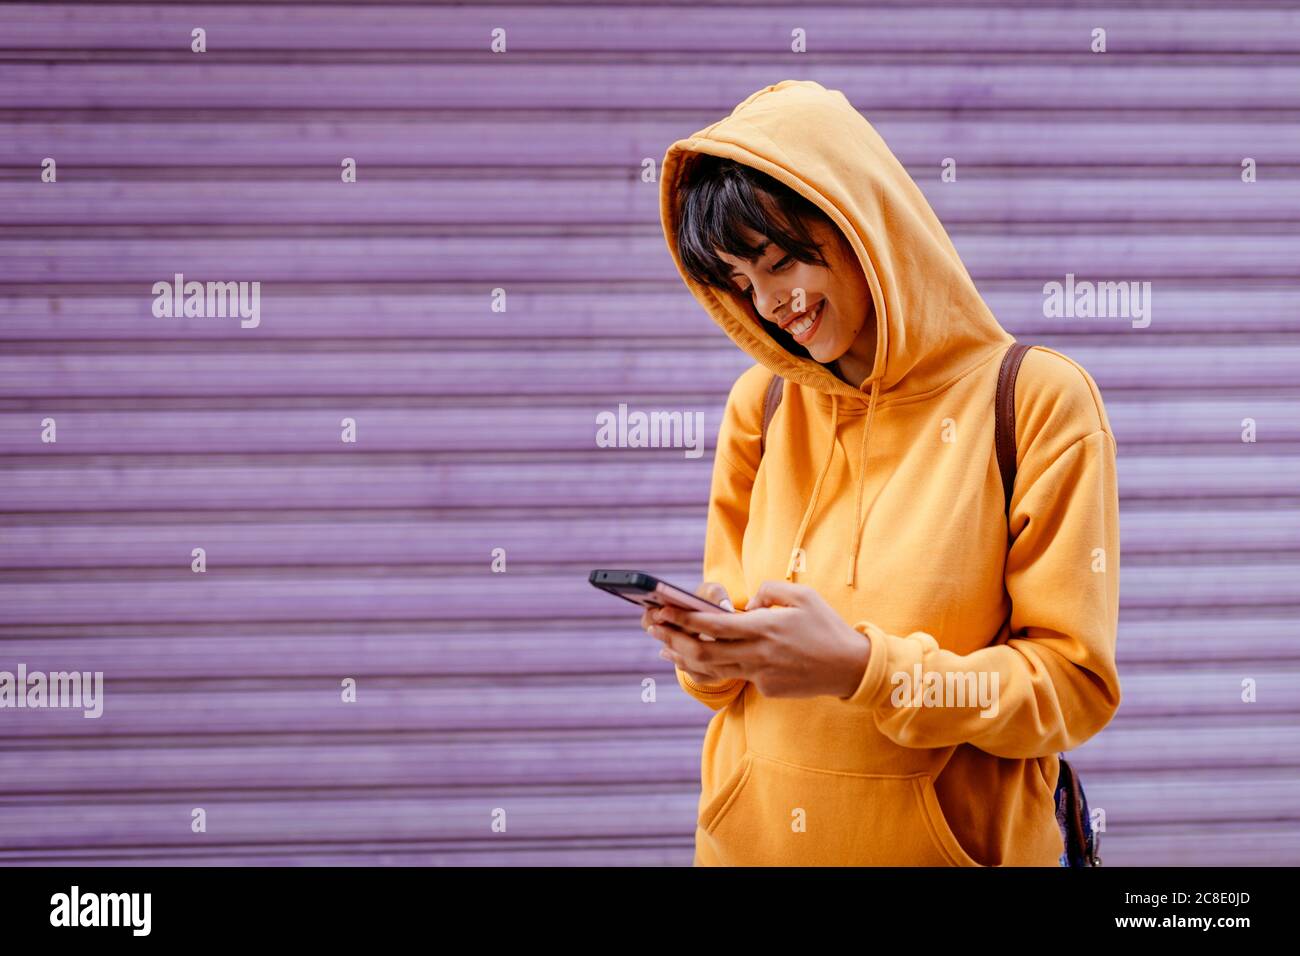 Portrait of young woman with yellow hoodie checking smartphone in front of purple background Stock Photo